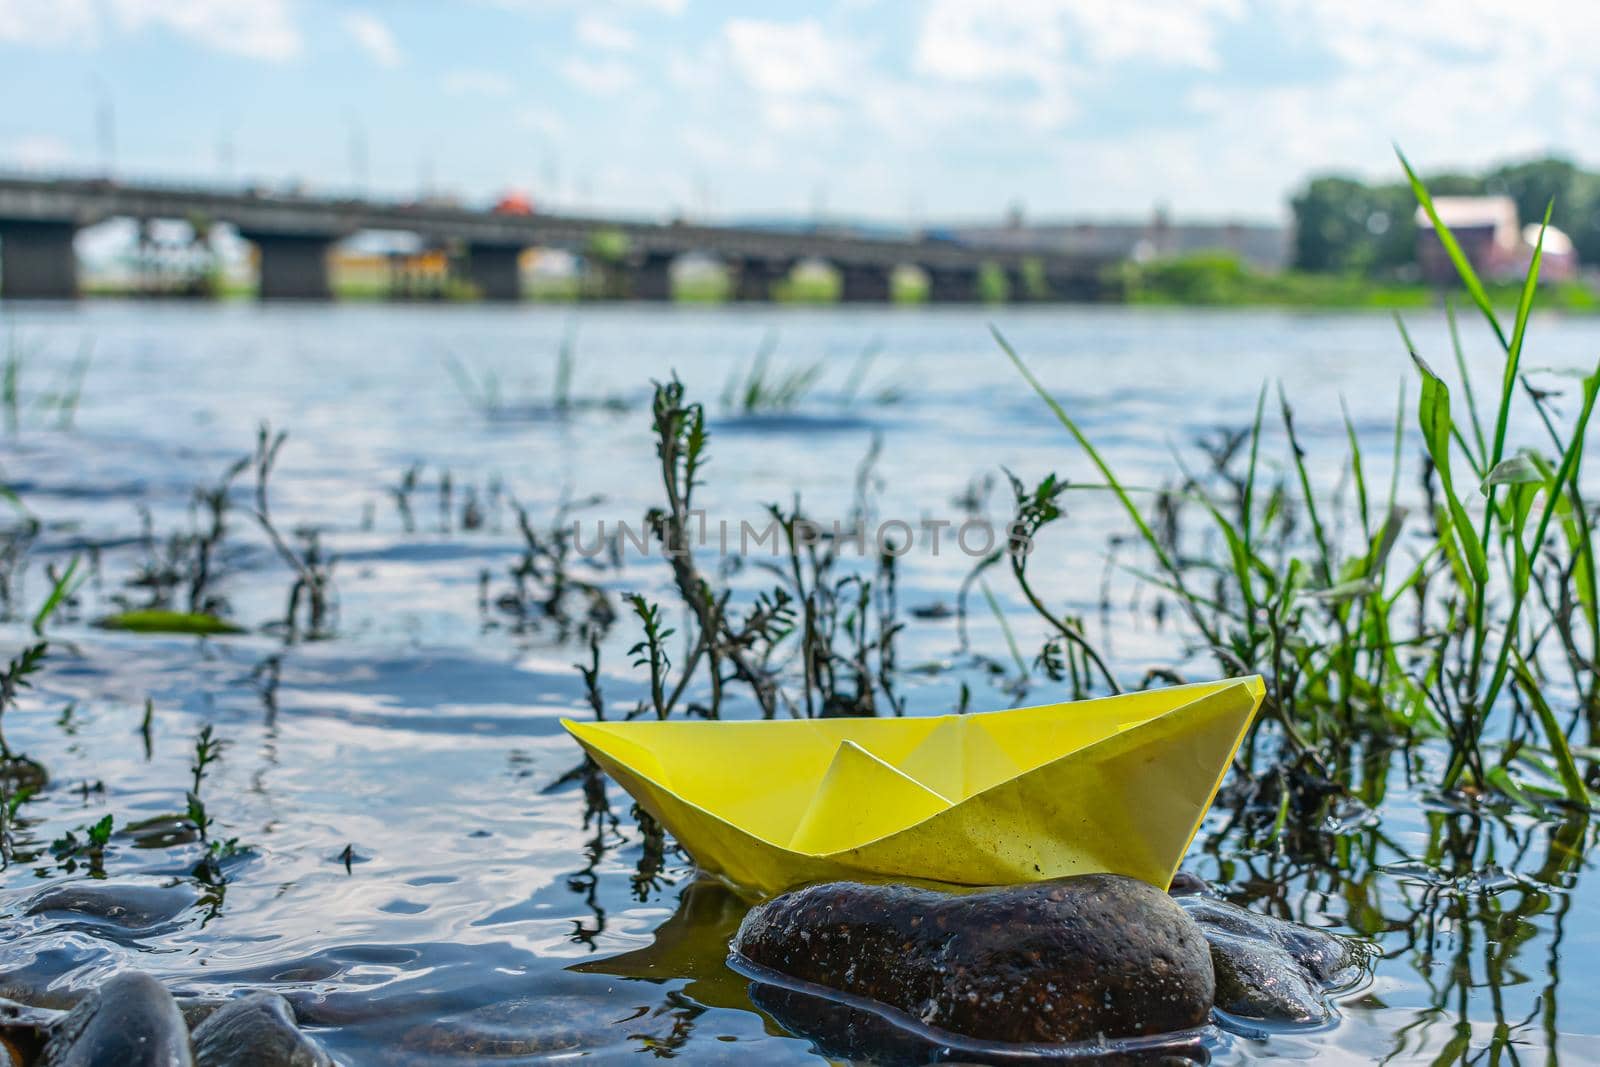 A paper boat shipwreck near a rocky river bank. Conceptual photo showing potential hazards in maritime transport